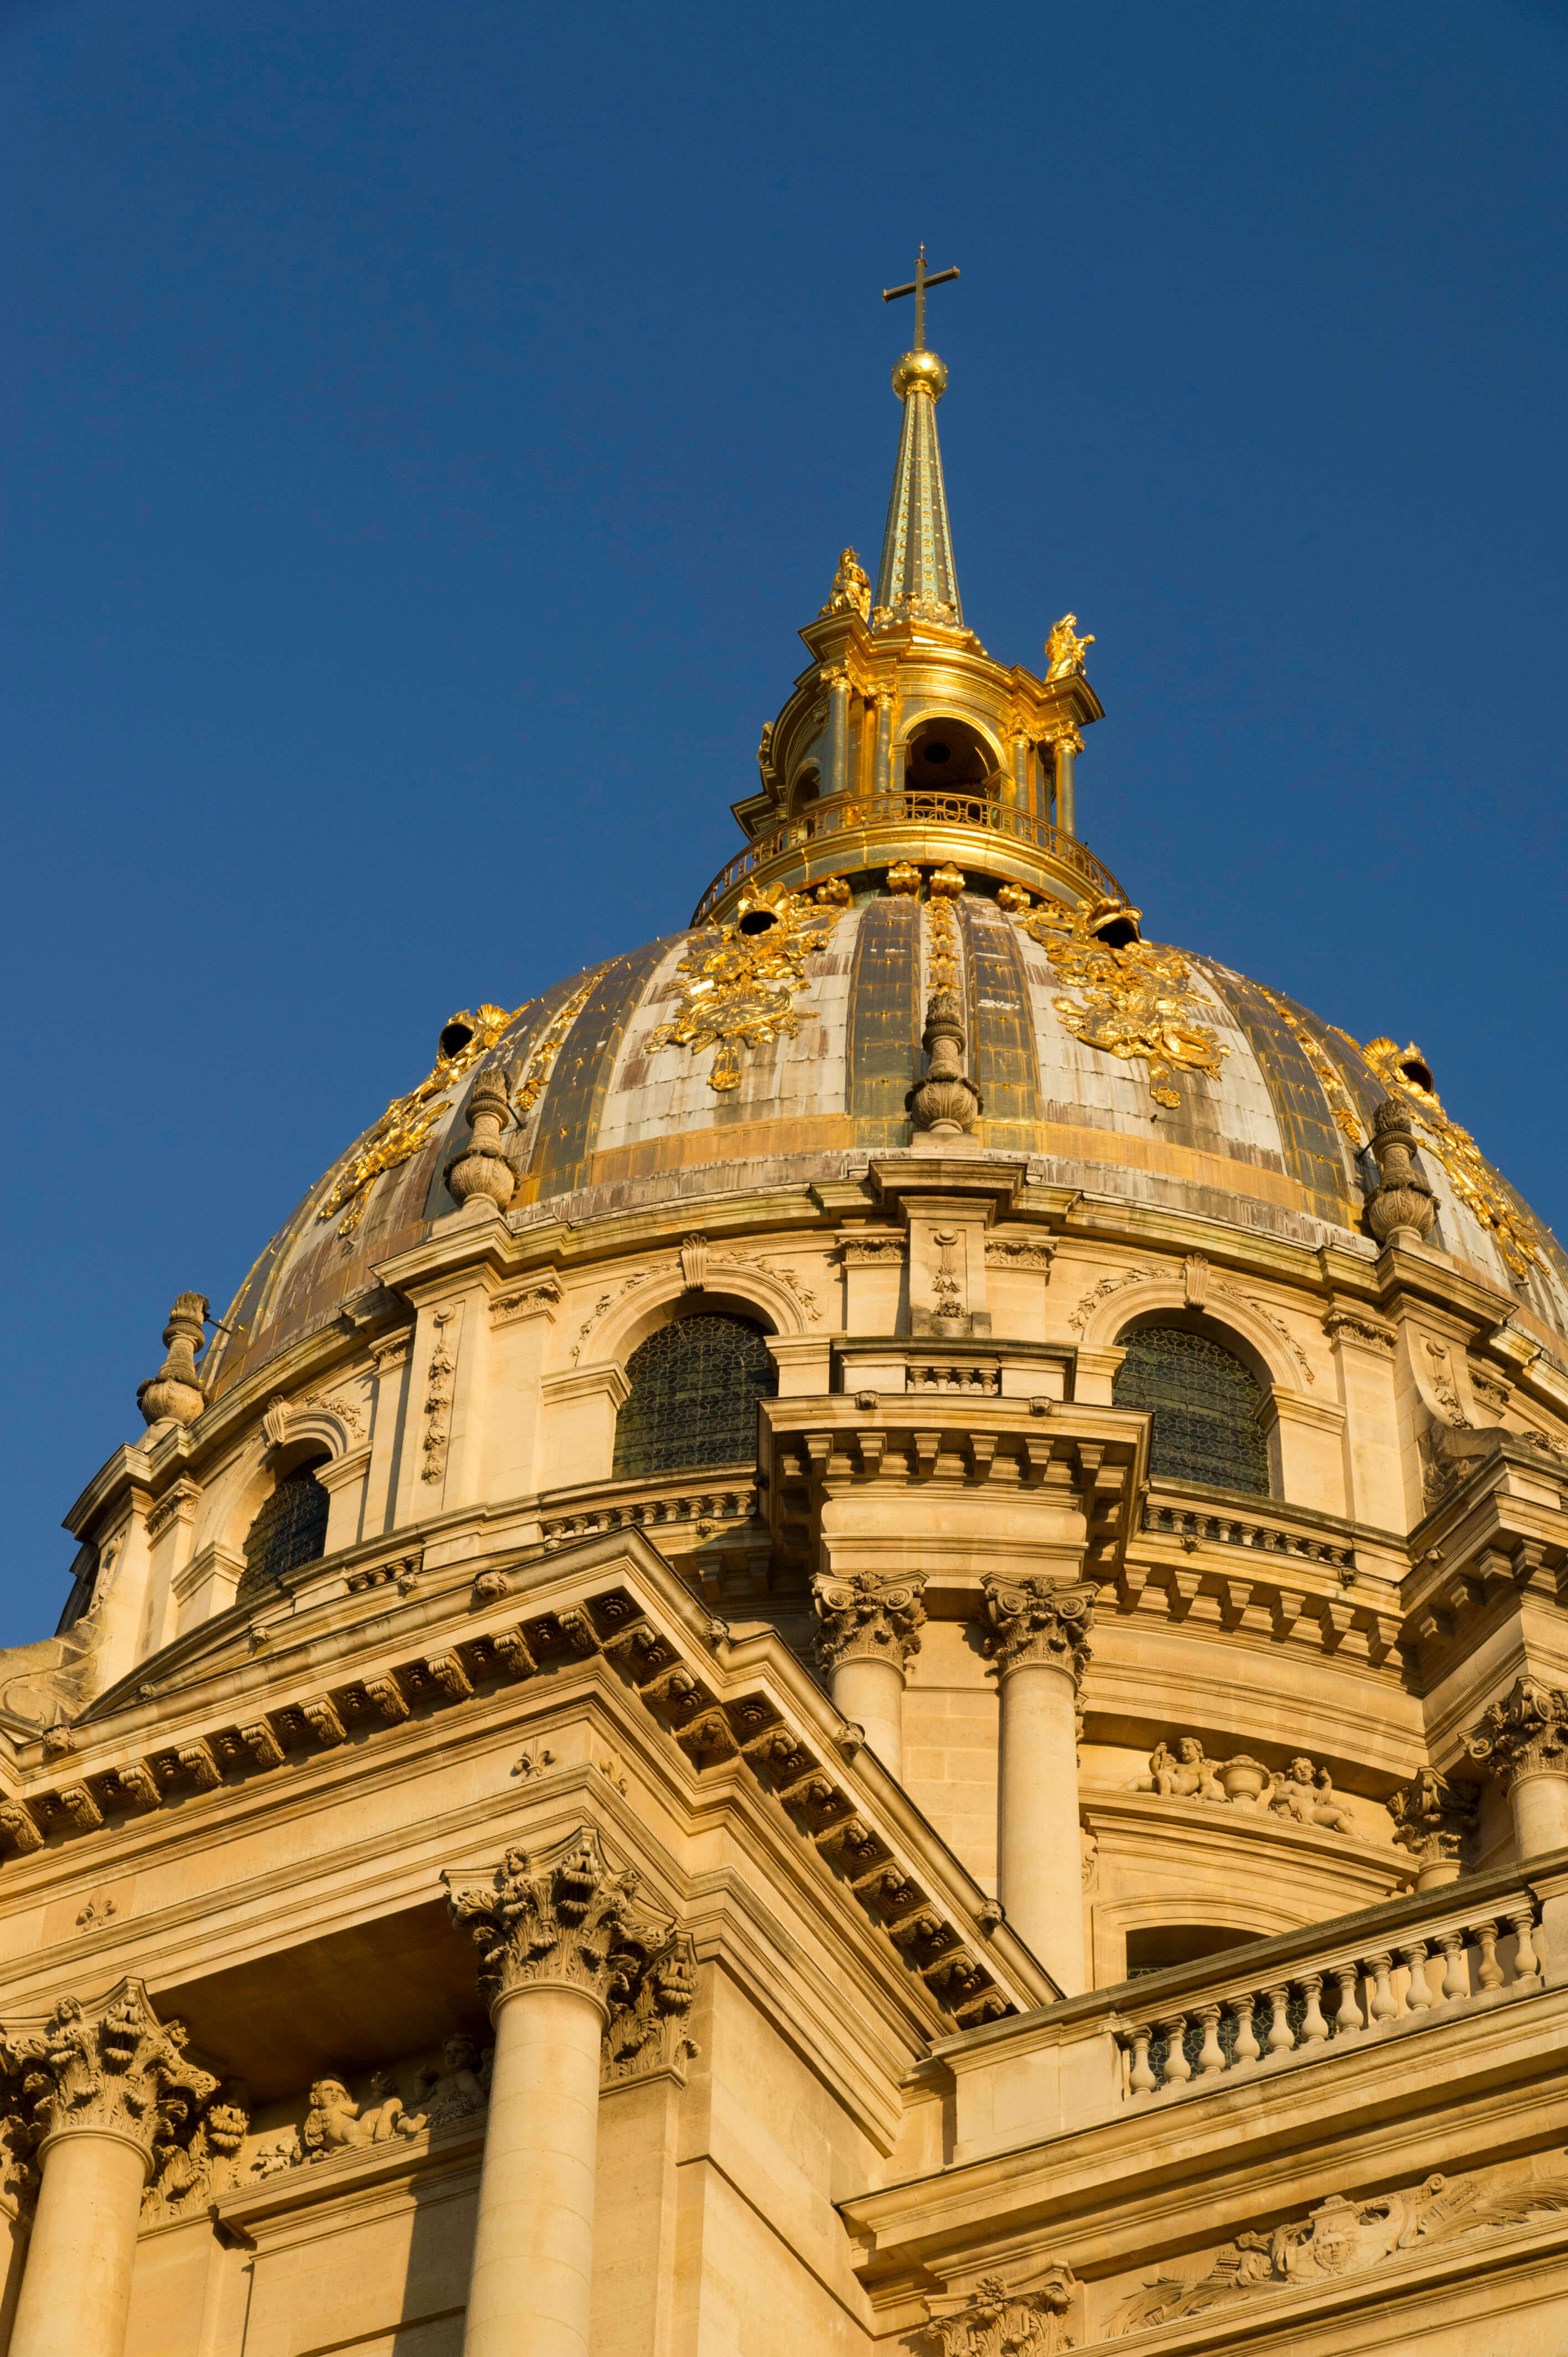 350th anniversary of the founding of the Hôtel des Invalides